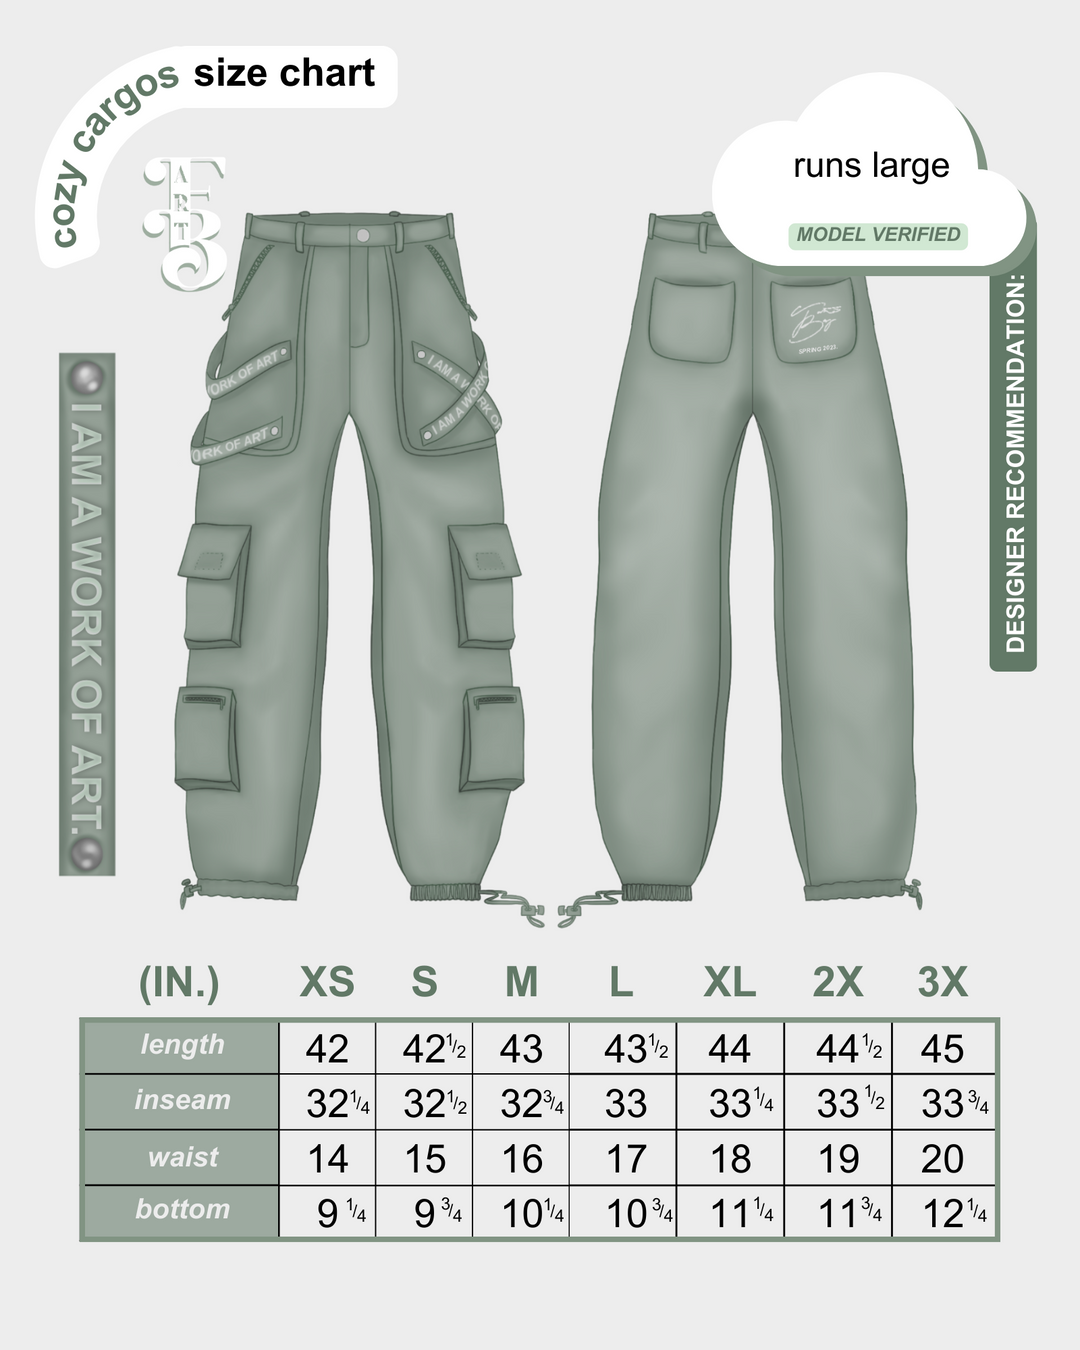 Sage Satin-Lined Pullover Hoodie & Cozy Cargos Set